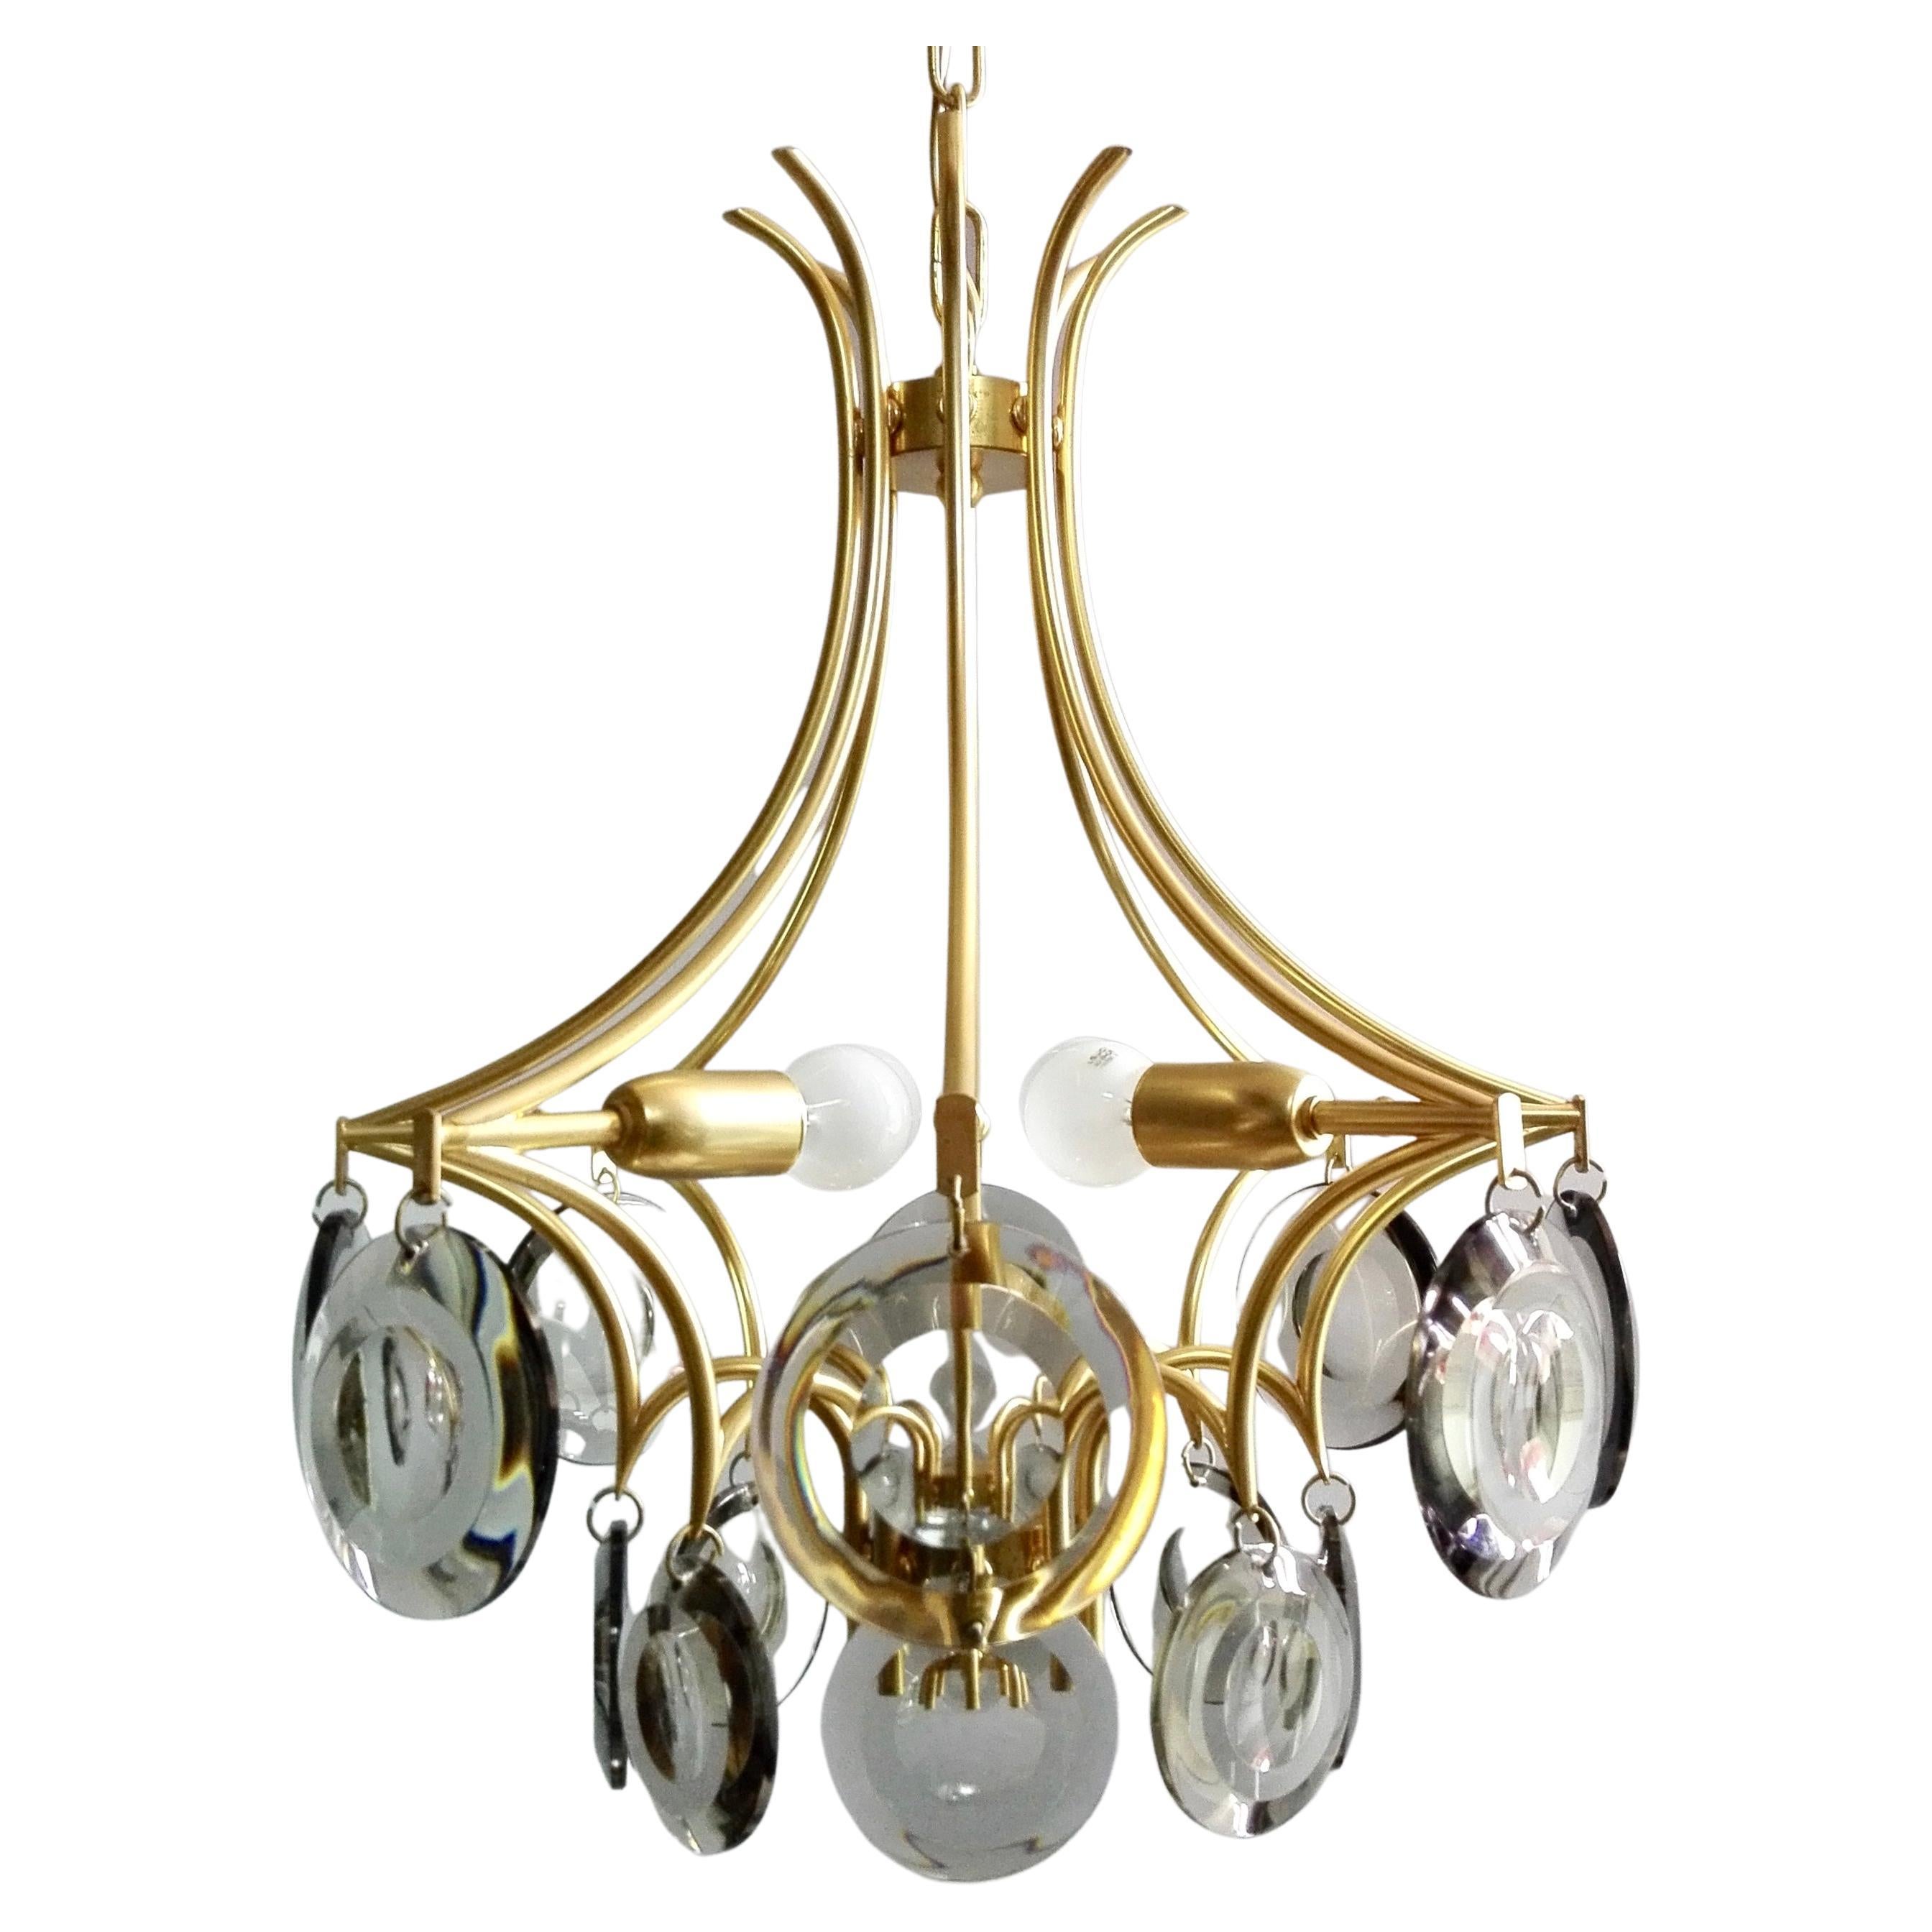 Vistosi Style 1970s Four-Light Gilded Chandelier. Smoked Optical Glass Discs.